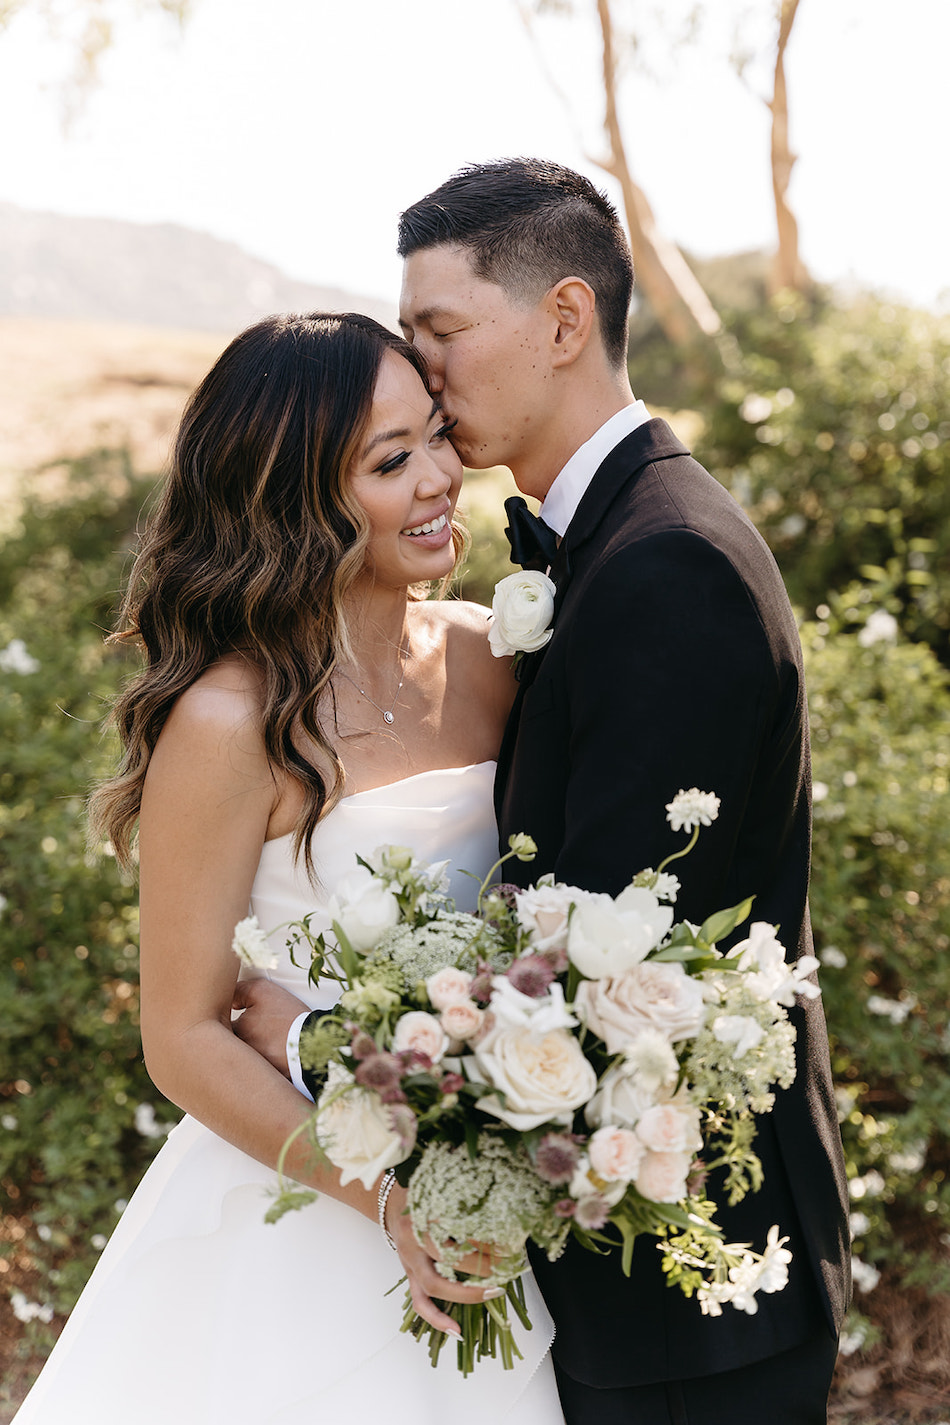 white bouquet, bridal bouquet, bride and groom, floral design, florist, wedding florist, wedding flowers, orange county weddings, orange county wedding florist, orange county florist, orange county floral design, flowers by cina